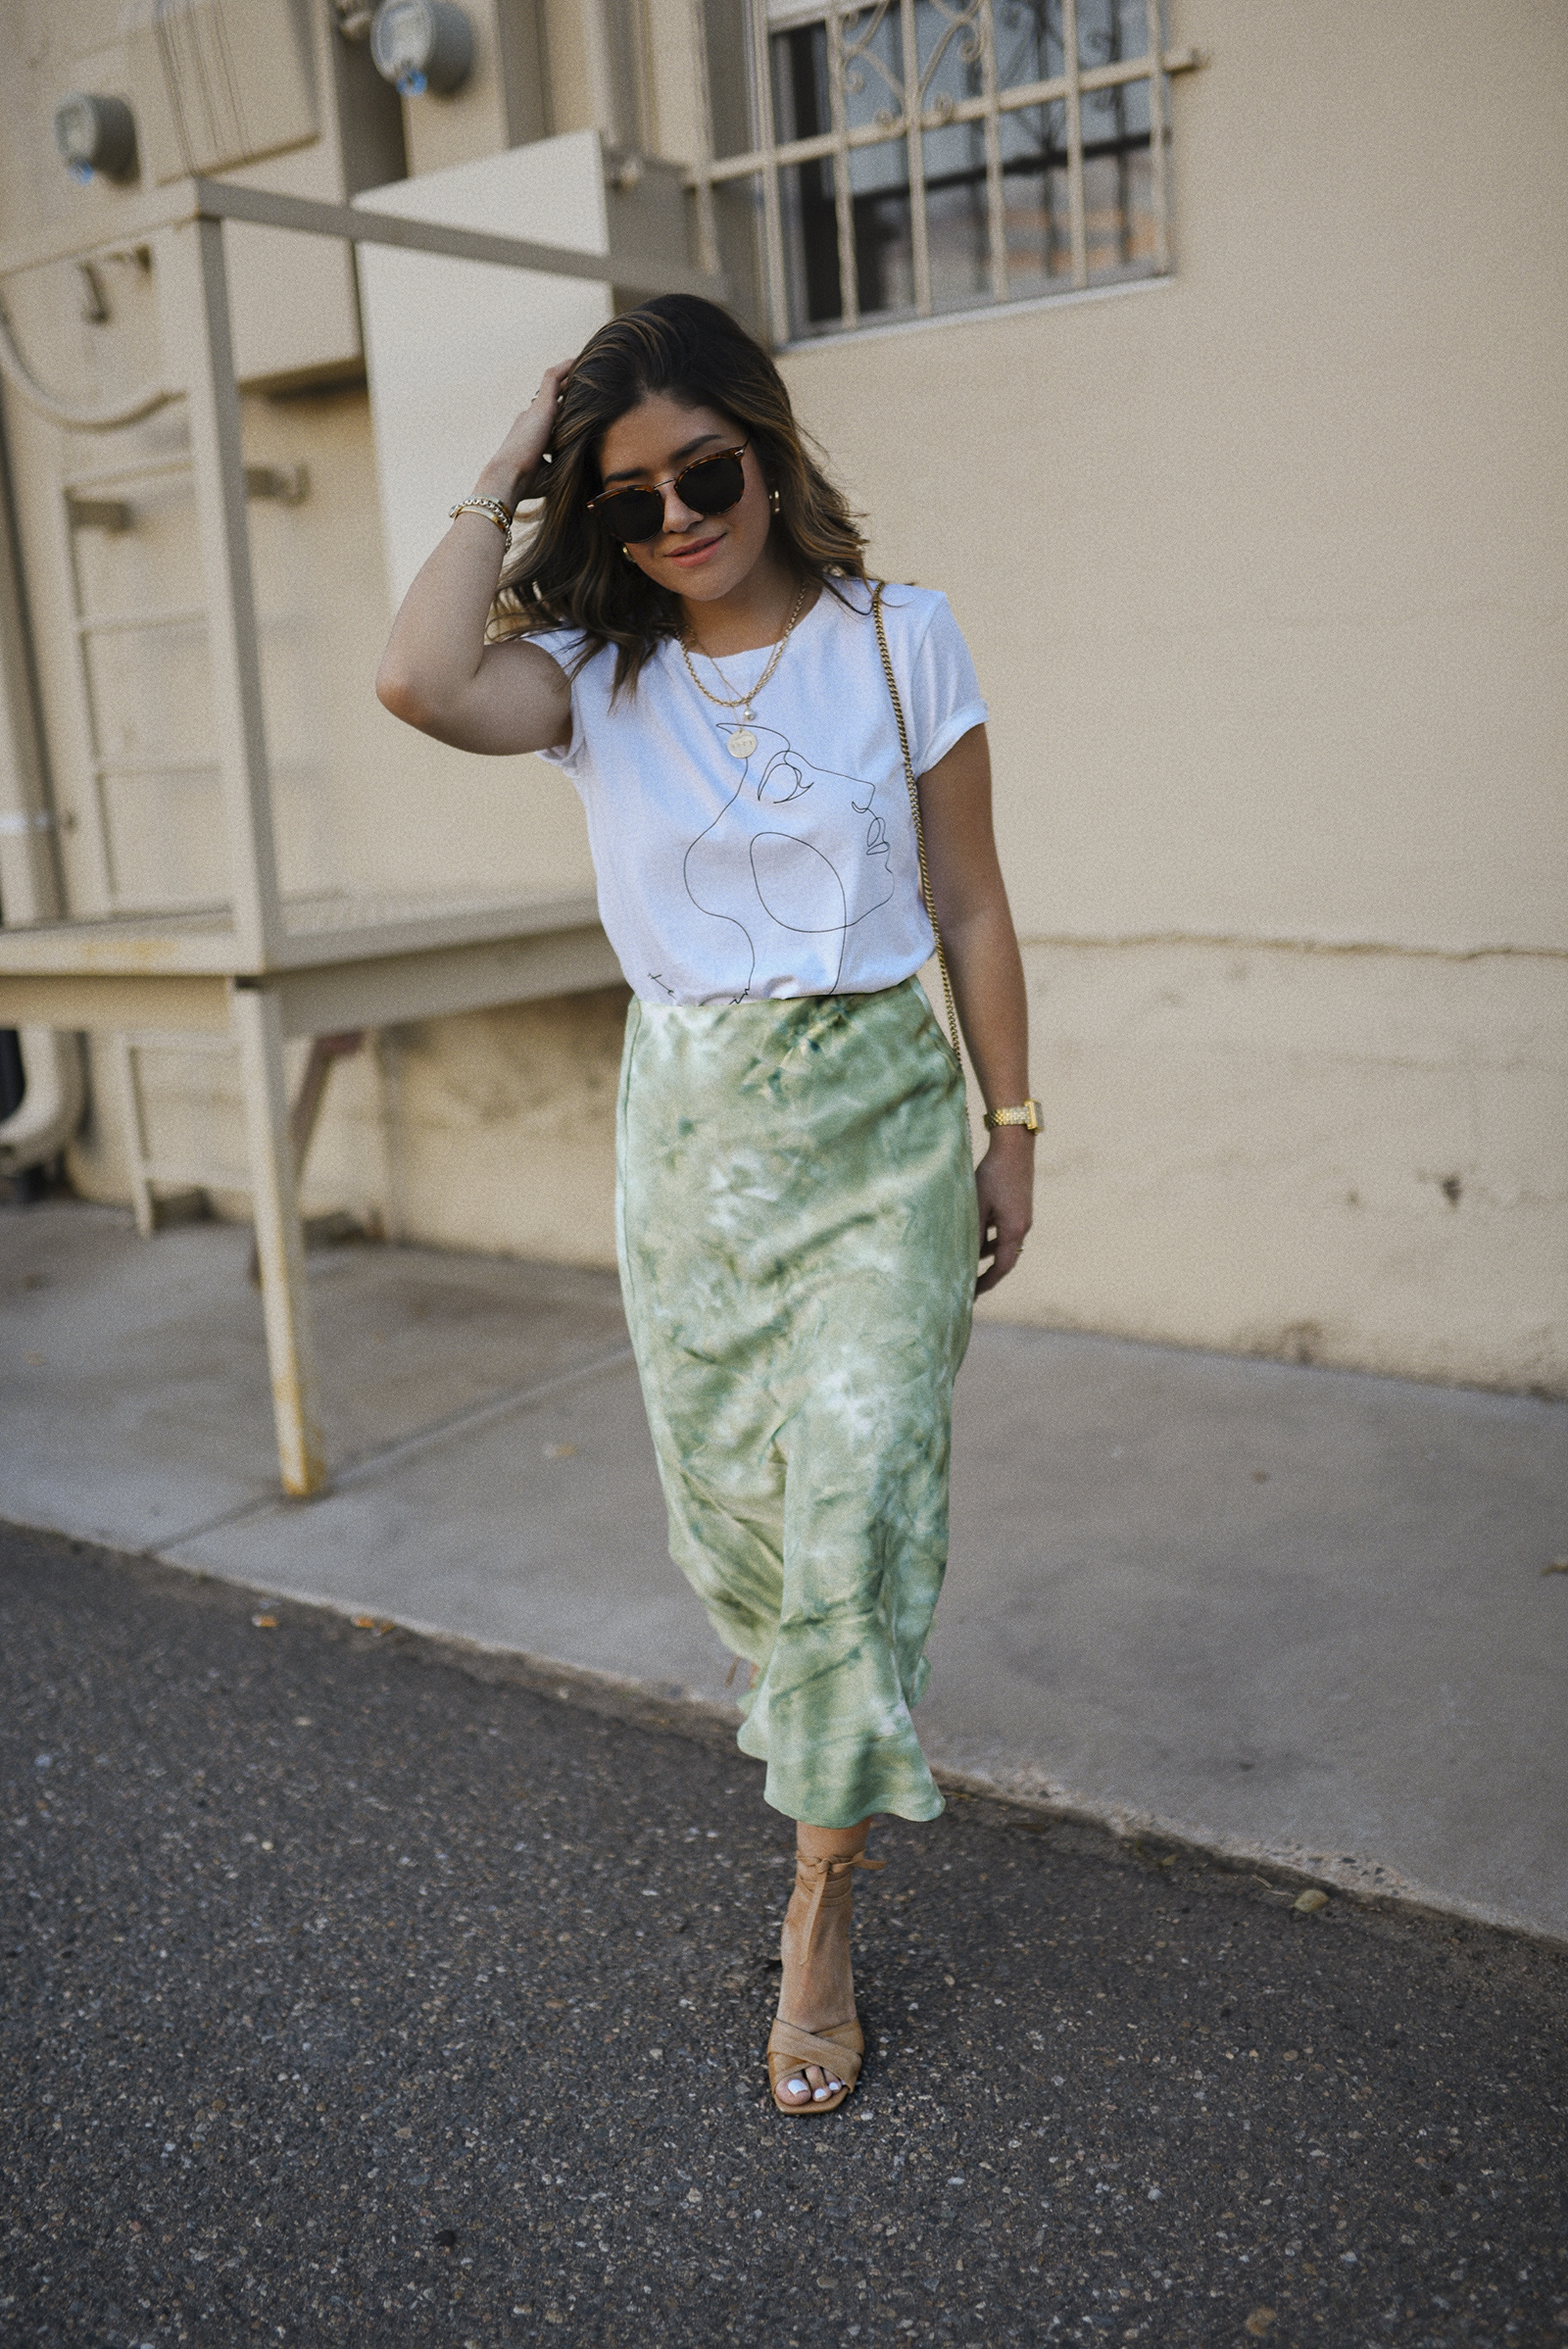 Carolina Hellal of Chic Talk wearing a Lucy Paris graphic tee, tie dye midi skirt, marc fisher sandals and Raen sunglasses.